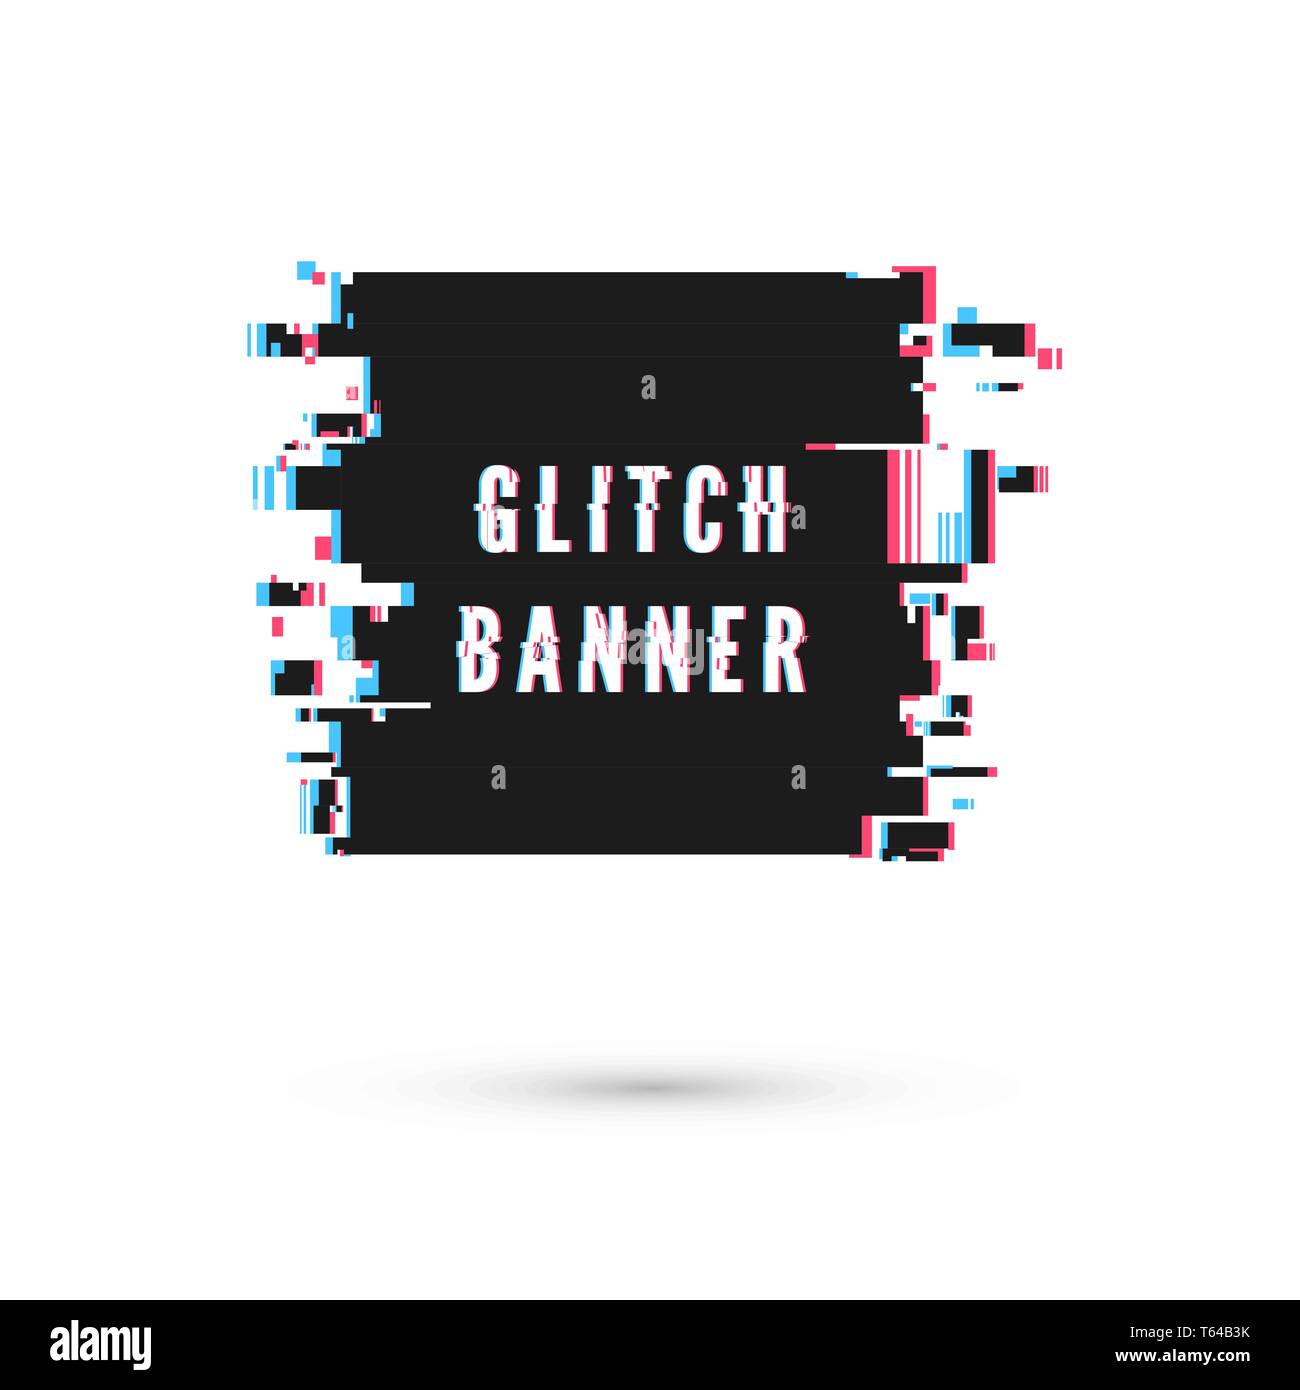 Square banner form in distorted glitch style. Vector illustration isolated on white background Stock Vector